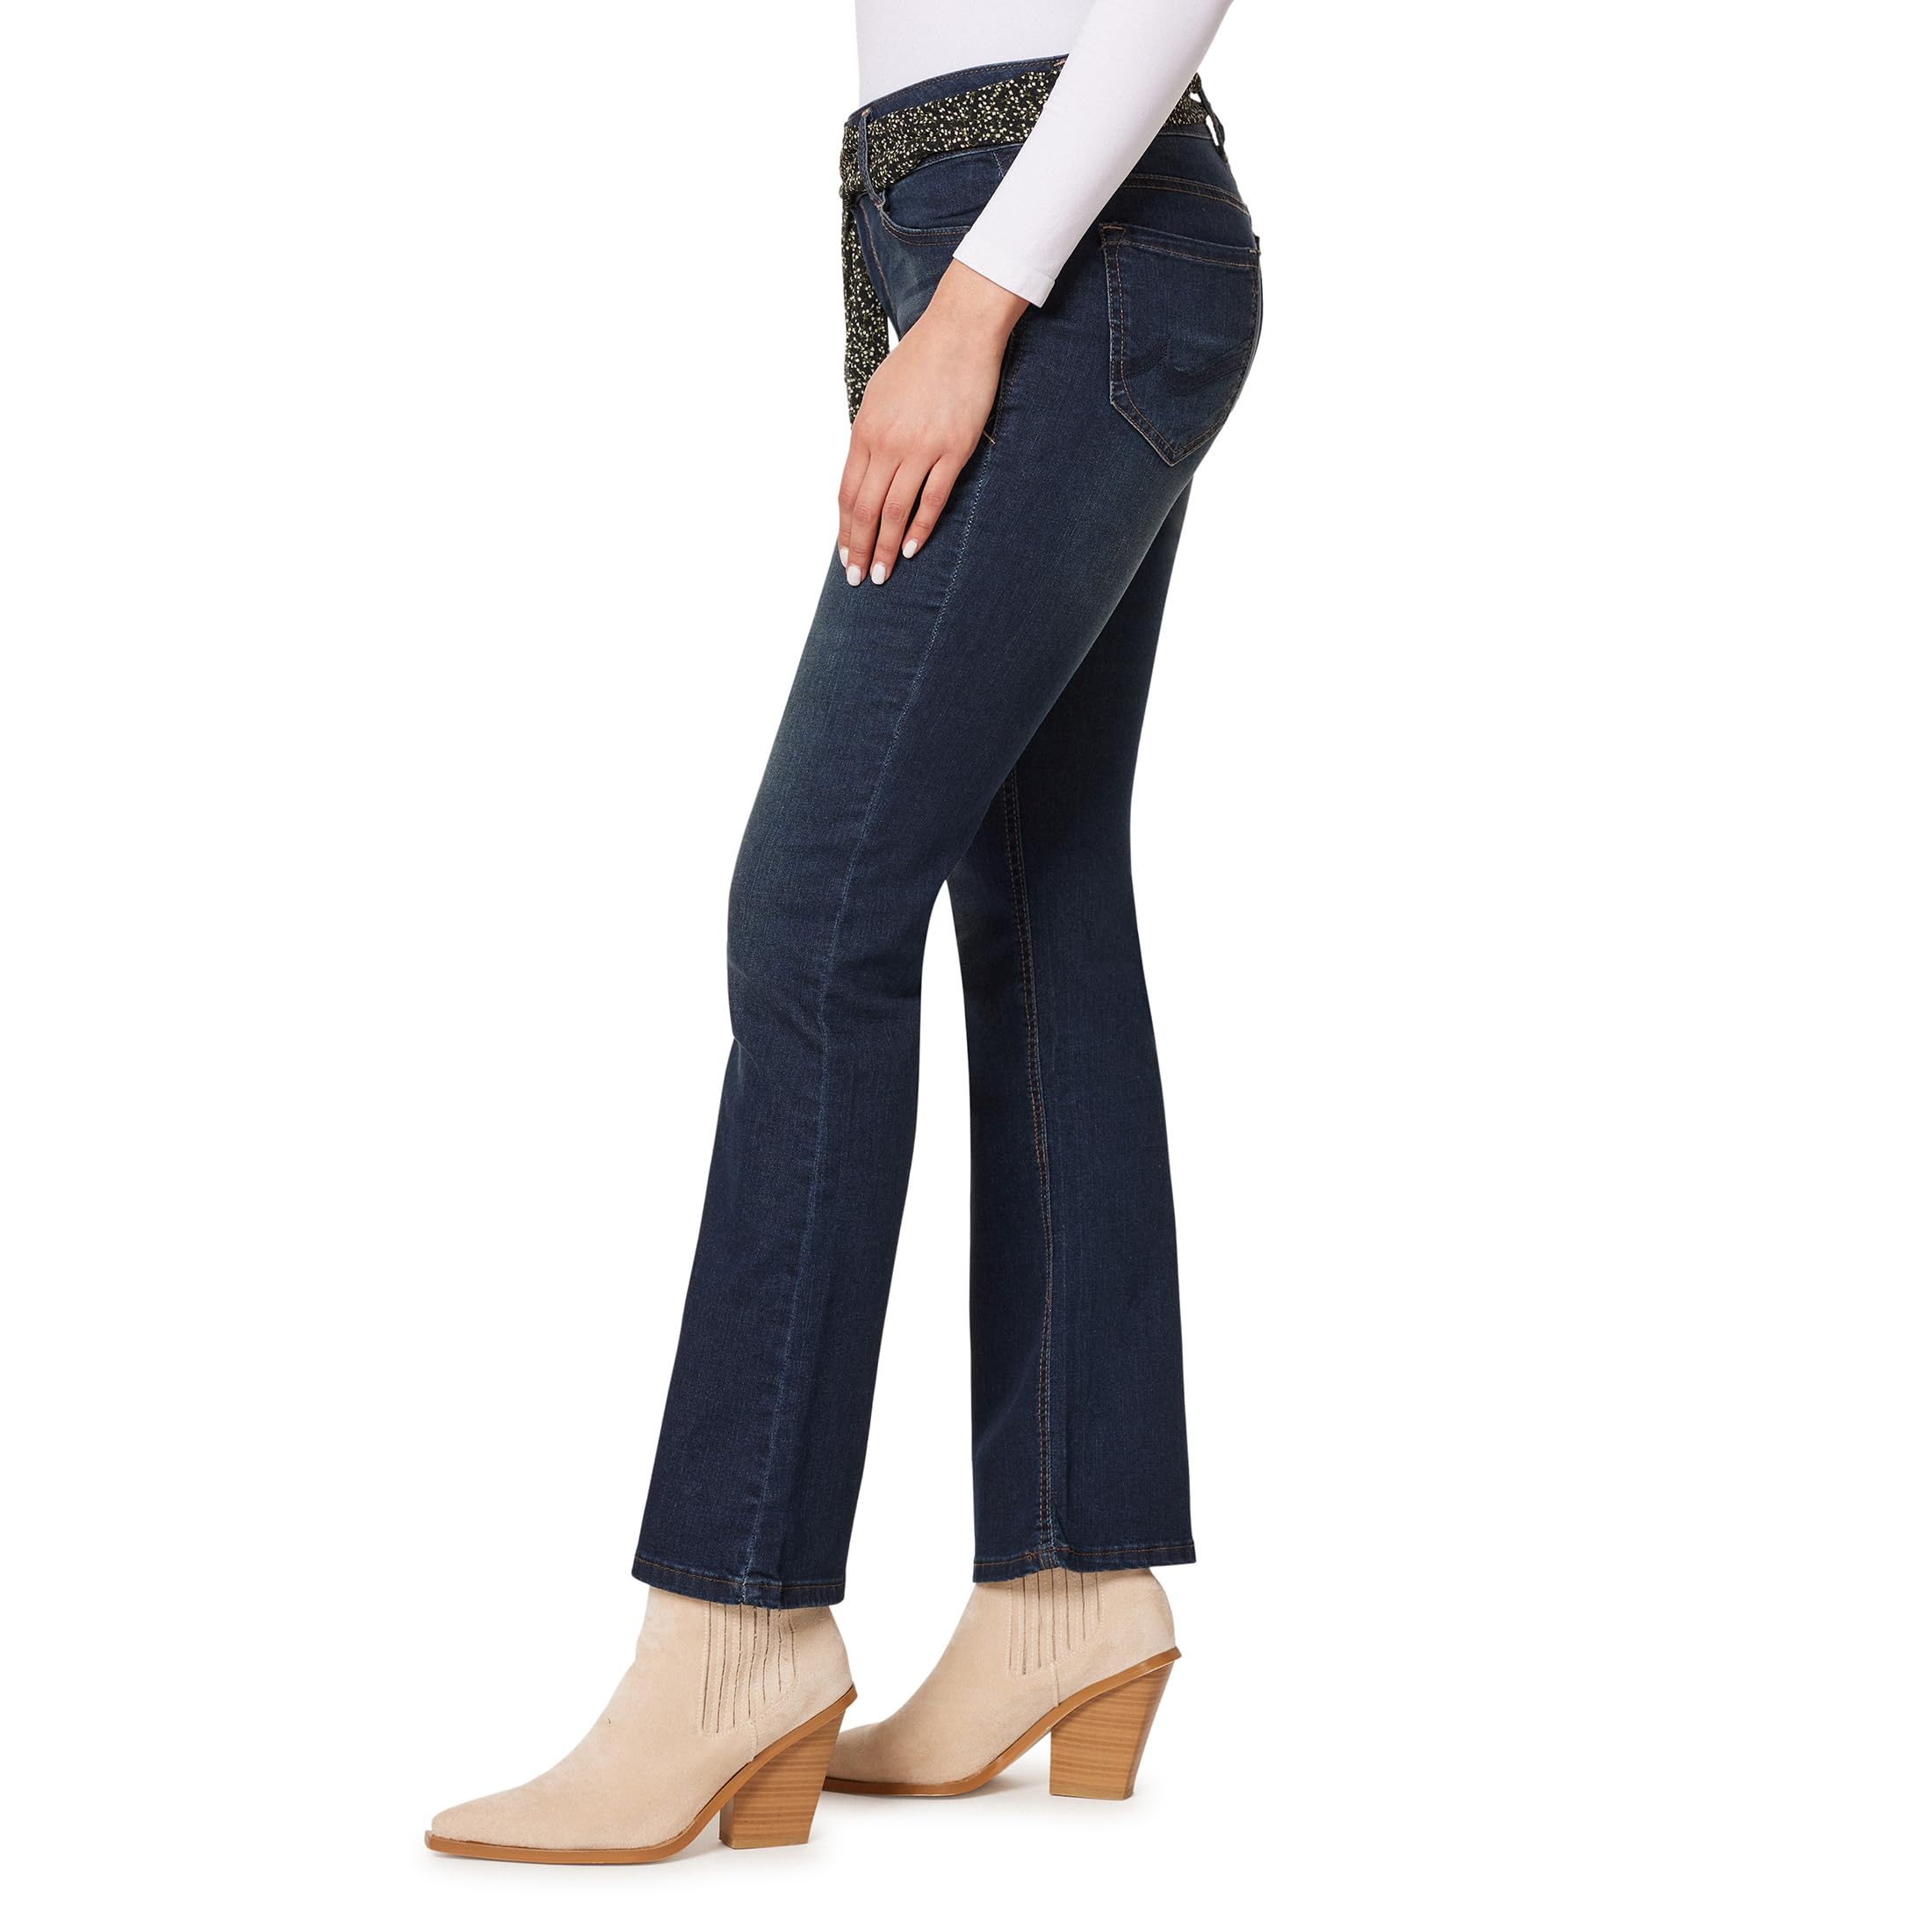 Angels Forever Young Women's Everflex Curvy Belted Bootcut Mid-Rise Jeans (Available in Plus Size)